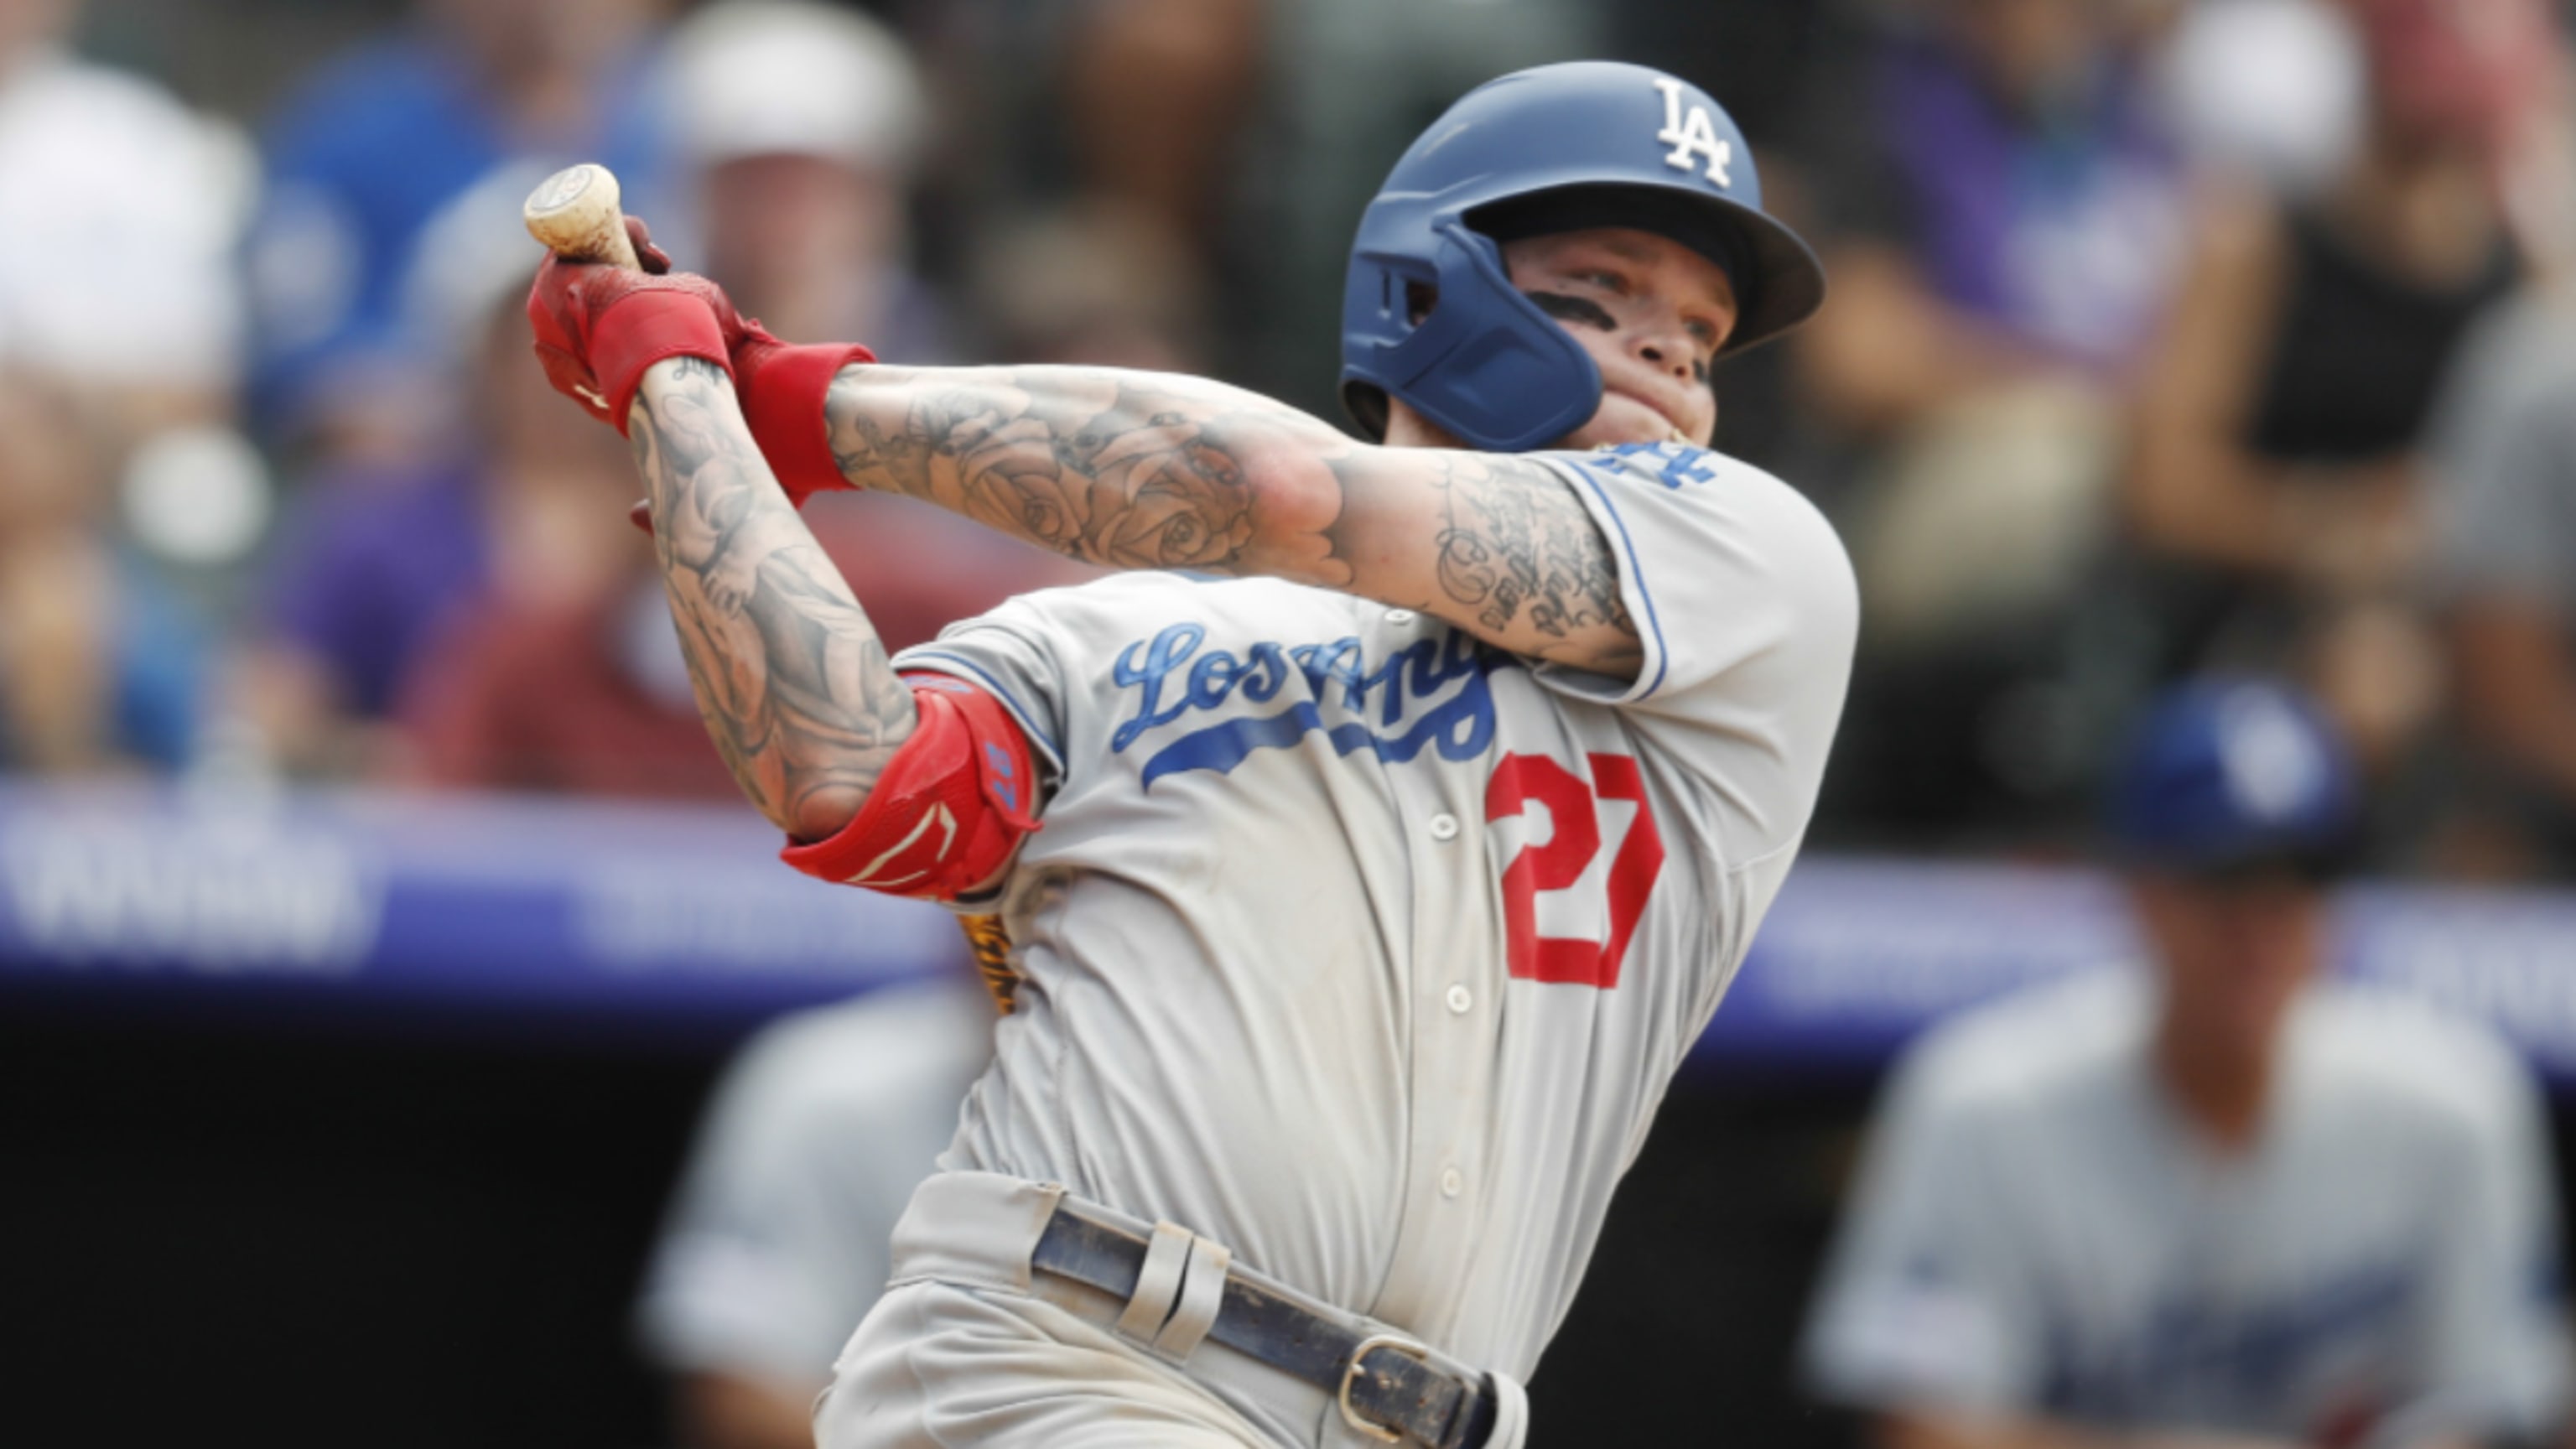 Verdugo showing why he was coveted in Betts' deal